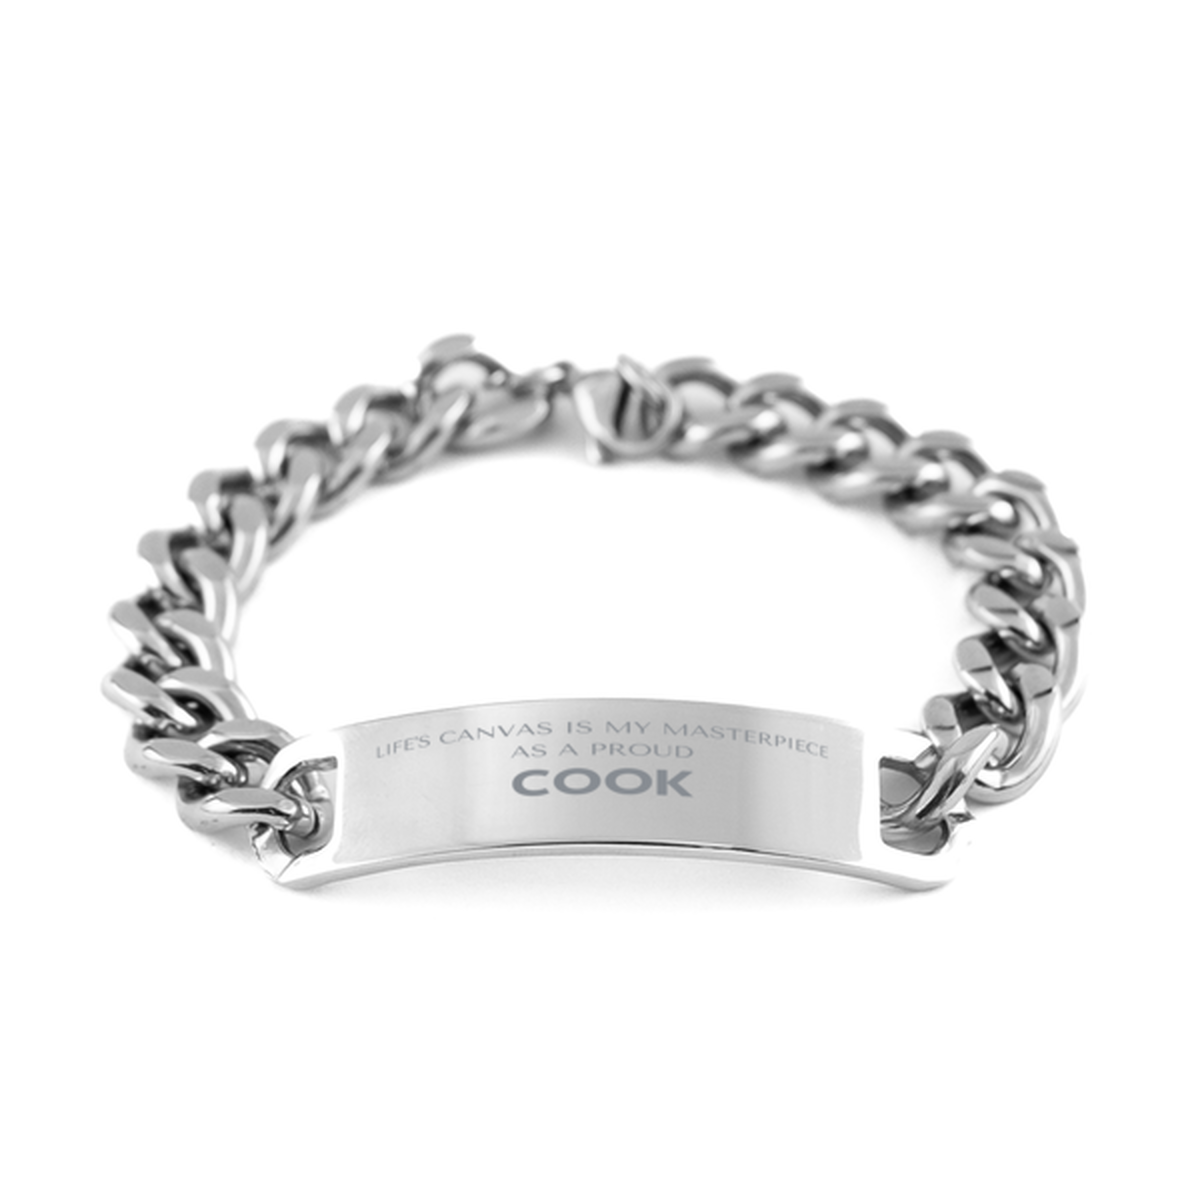 Proud Cook Gifts, Life's canvas is my masterpiece, Epic Birthday Christmas Unique Cuban Chain Stainless Steel Bracelet For Cook, Coworkers, Men, Women, Friends